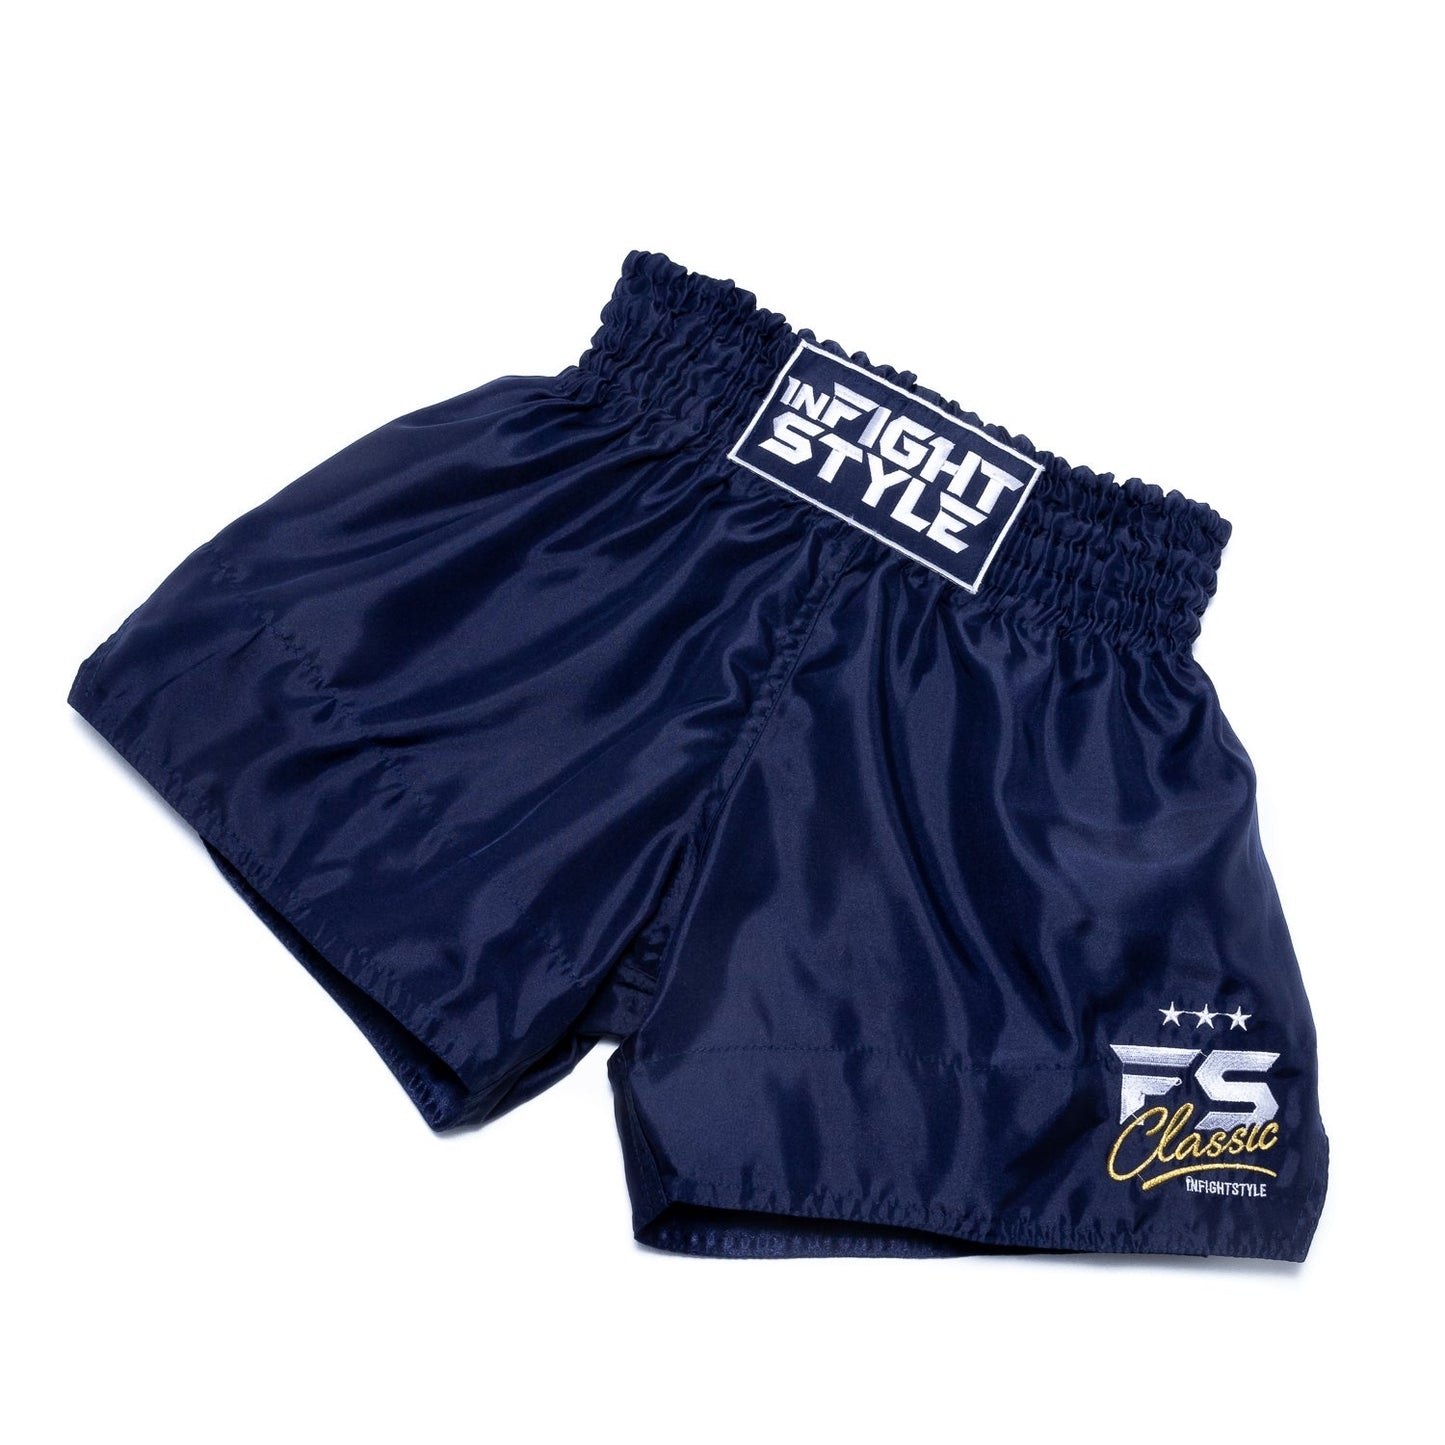 INFIGHTSTYLE SHORTS FS CLASSIC